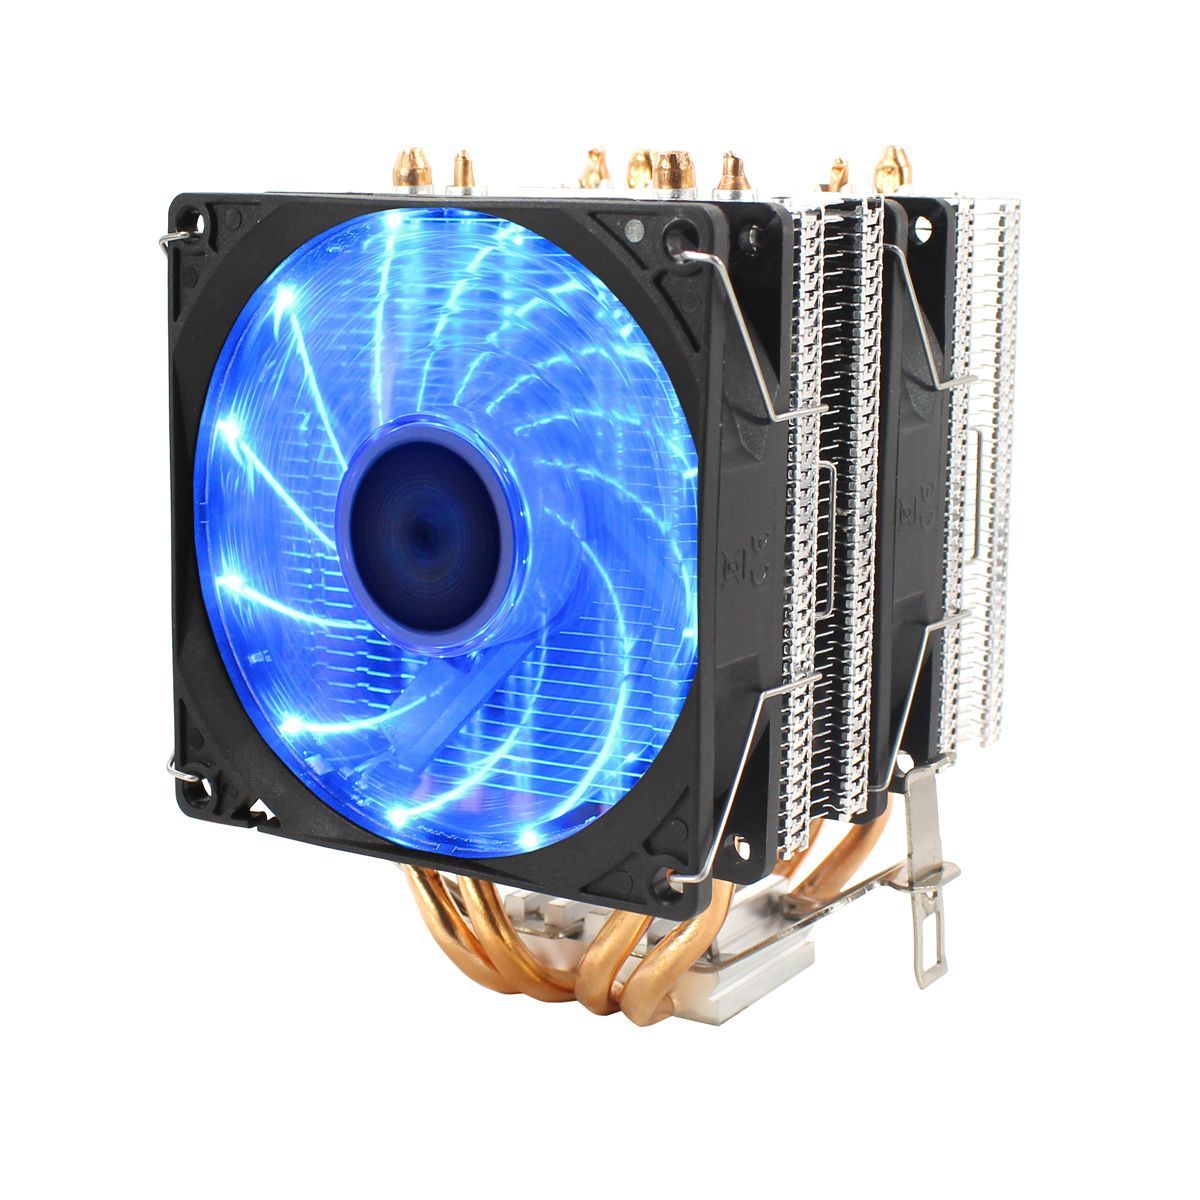 LANSHUO-CPU-Silent-Double-Fan-4-Heat-Pipe-2-Wire-Intelligent-Temperature-Control-CPU-Cooler-Cooling--1641240